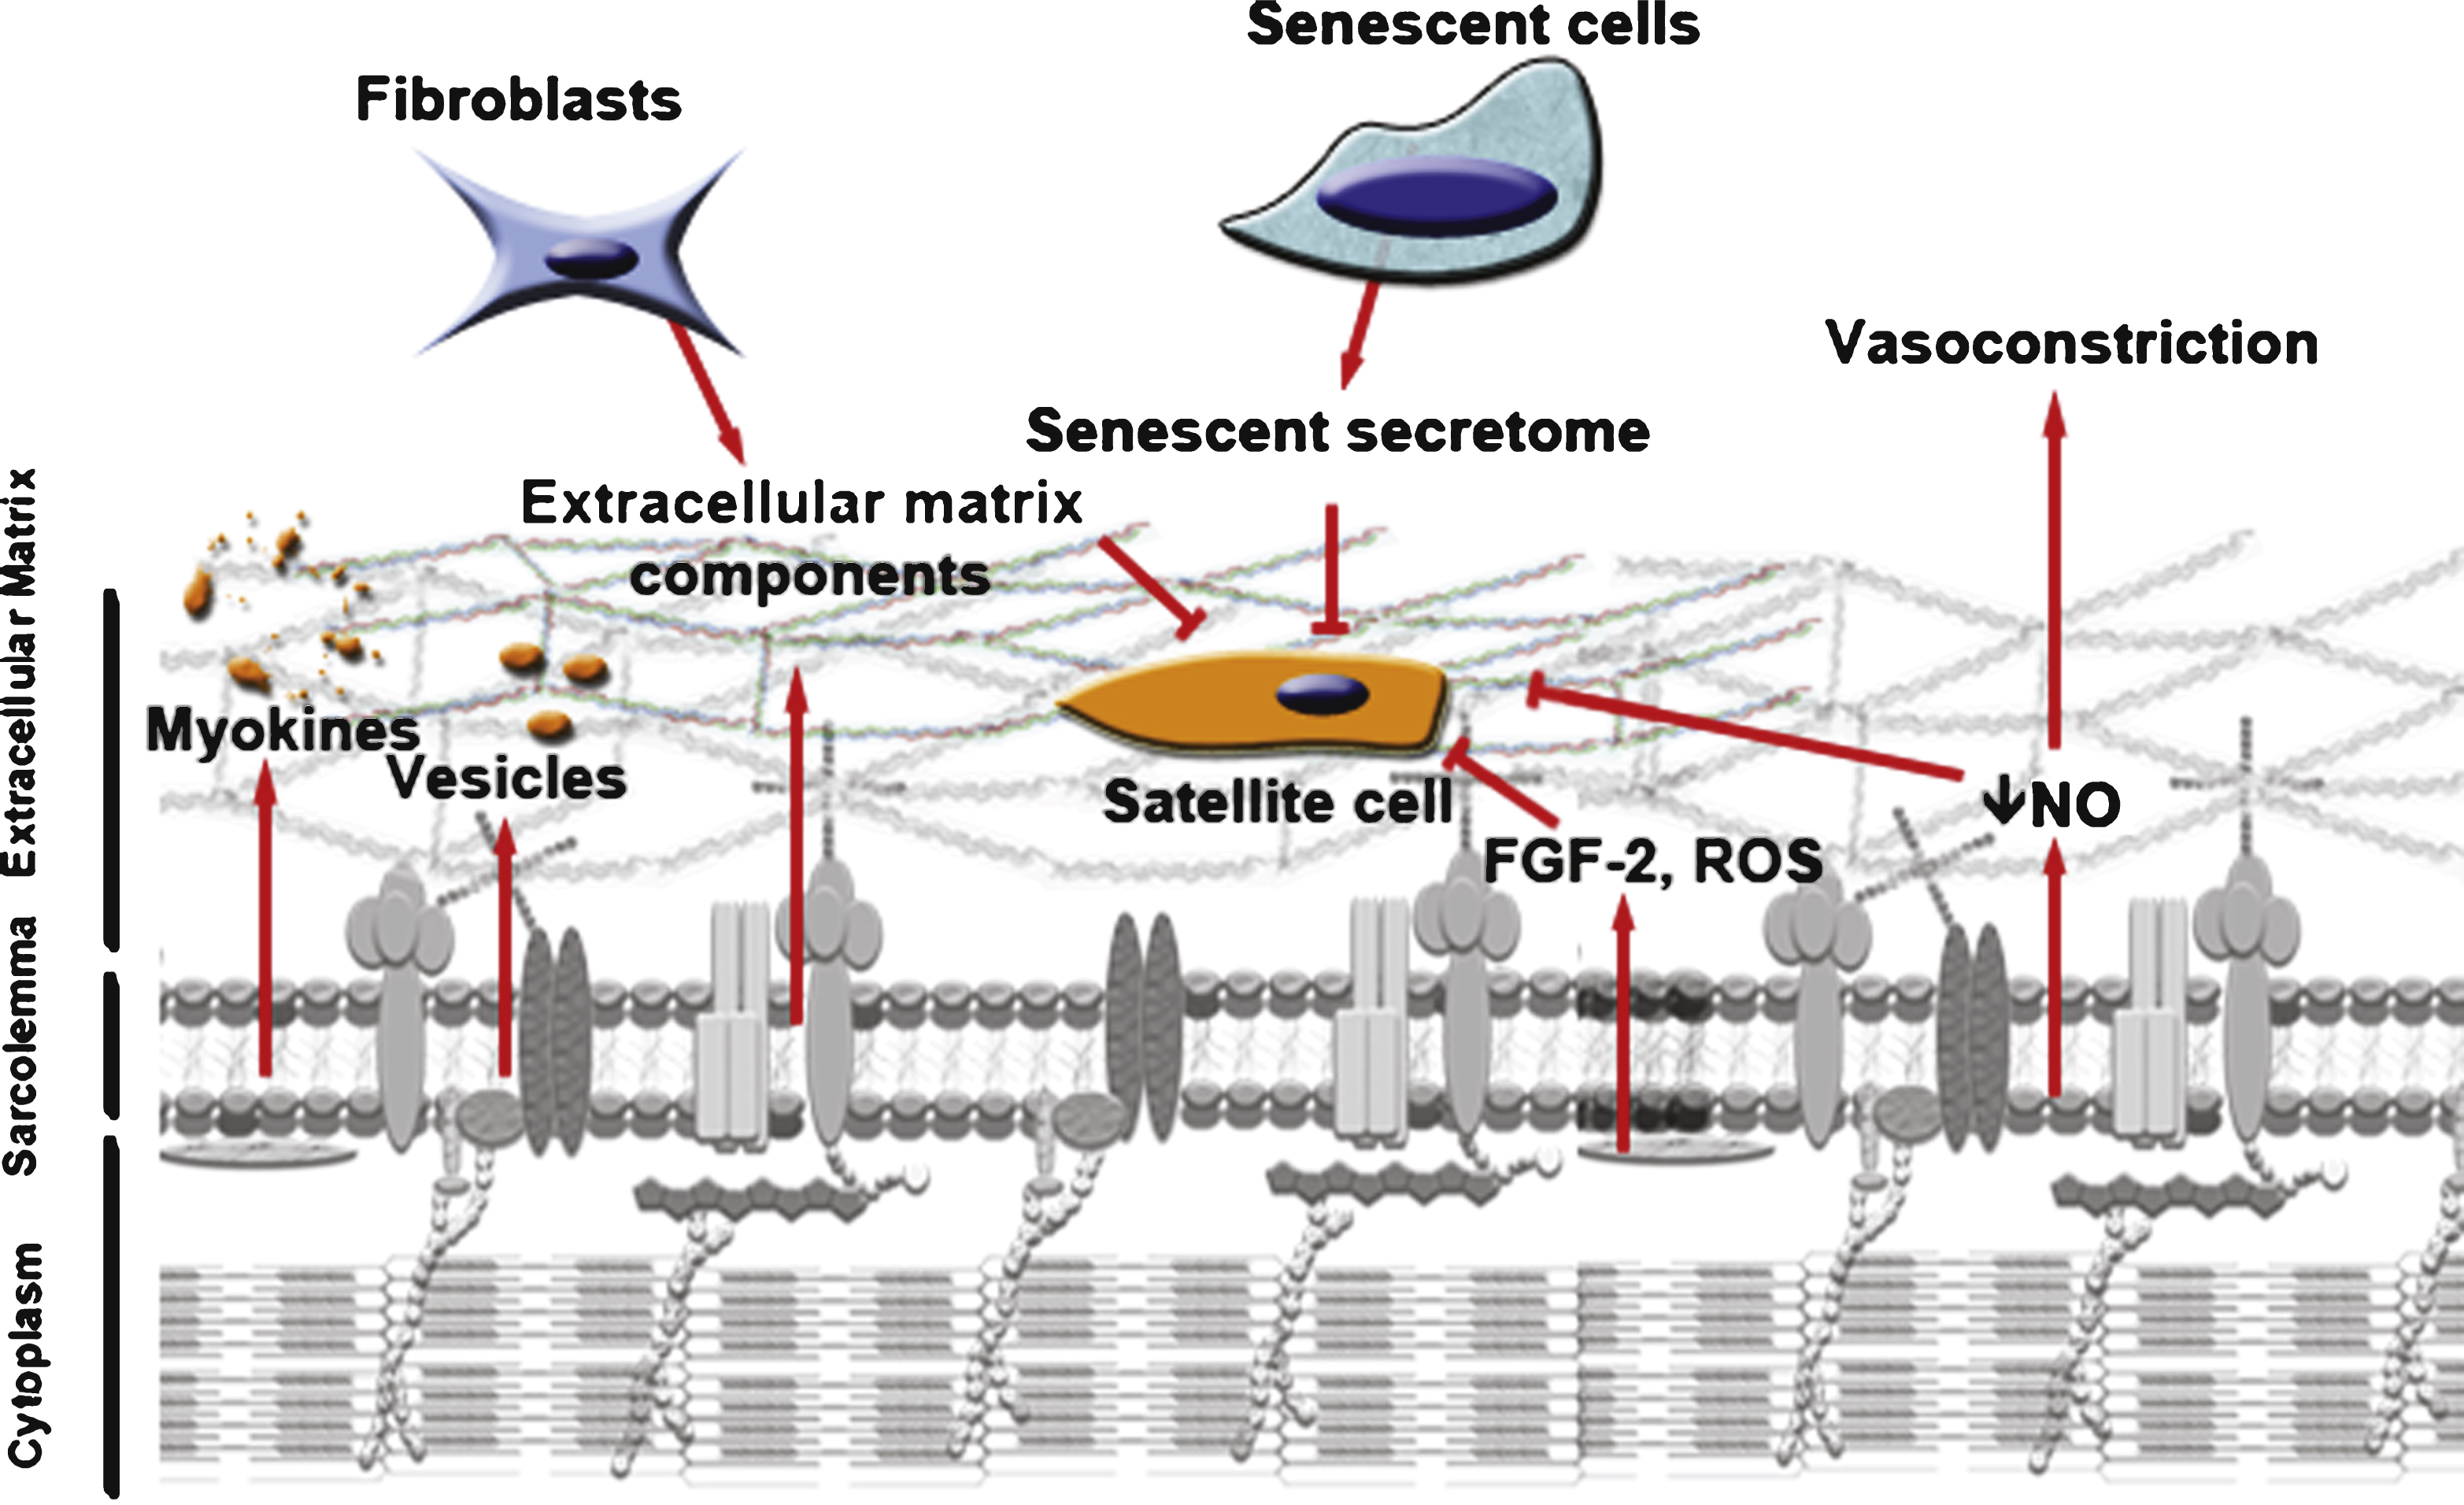 Aging changes the microenvironment of the satellite cell. Decreased muscle mass can be accompanied by a decrease in myokines and vesicles secreted into the microenvironment of the satellite cells. Aged myofibers produce more ROS and FGF-2, factors that can change epigenetic marking of the satellite cells and shut down their myogenic program and their capacity to re-quiesce. They also release less NO into their environment, stimulating vasoconstriction which may inhibit serum tissue perfusion. Aged fibroblasts present in the muscle can secrete more fibrous proteins, thickening the ECM. In turn, this decreases the diffusion of growth factors toward the satellite cells and thus their responsiveness to muscle repair cues. Increase in senescent cells with age can secrete factors that inhibit tissue regeneration. The microenvironment of the satellite cells is thus altered and affects their capacity to respond to any muscle damage.